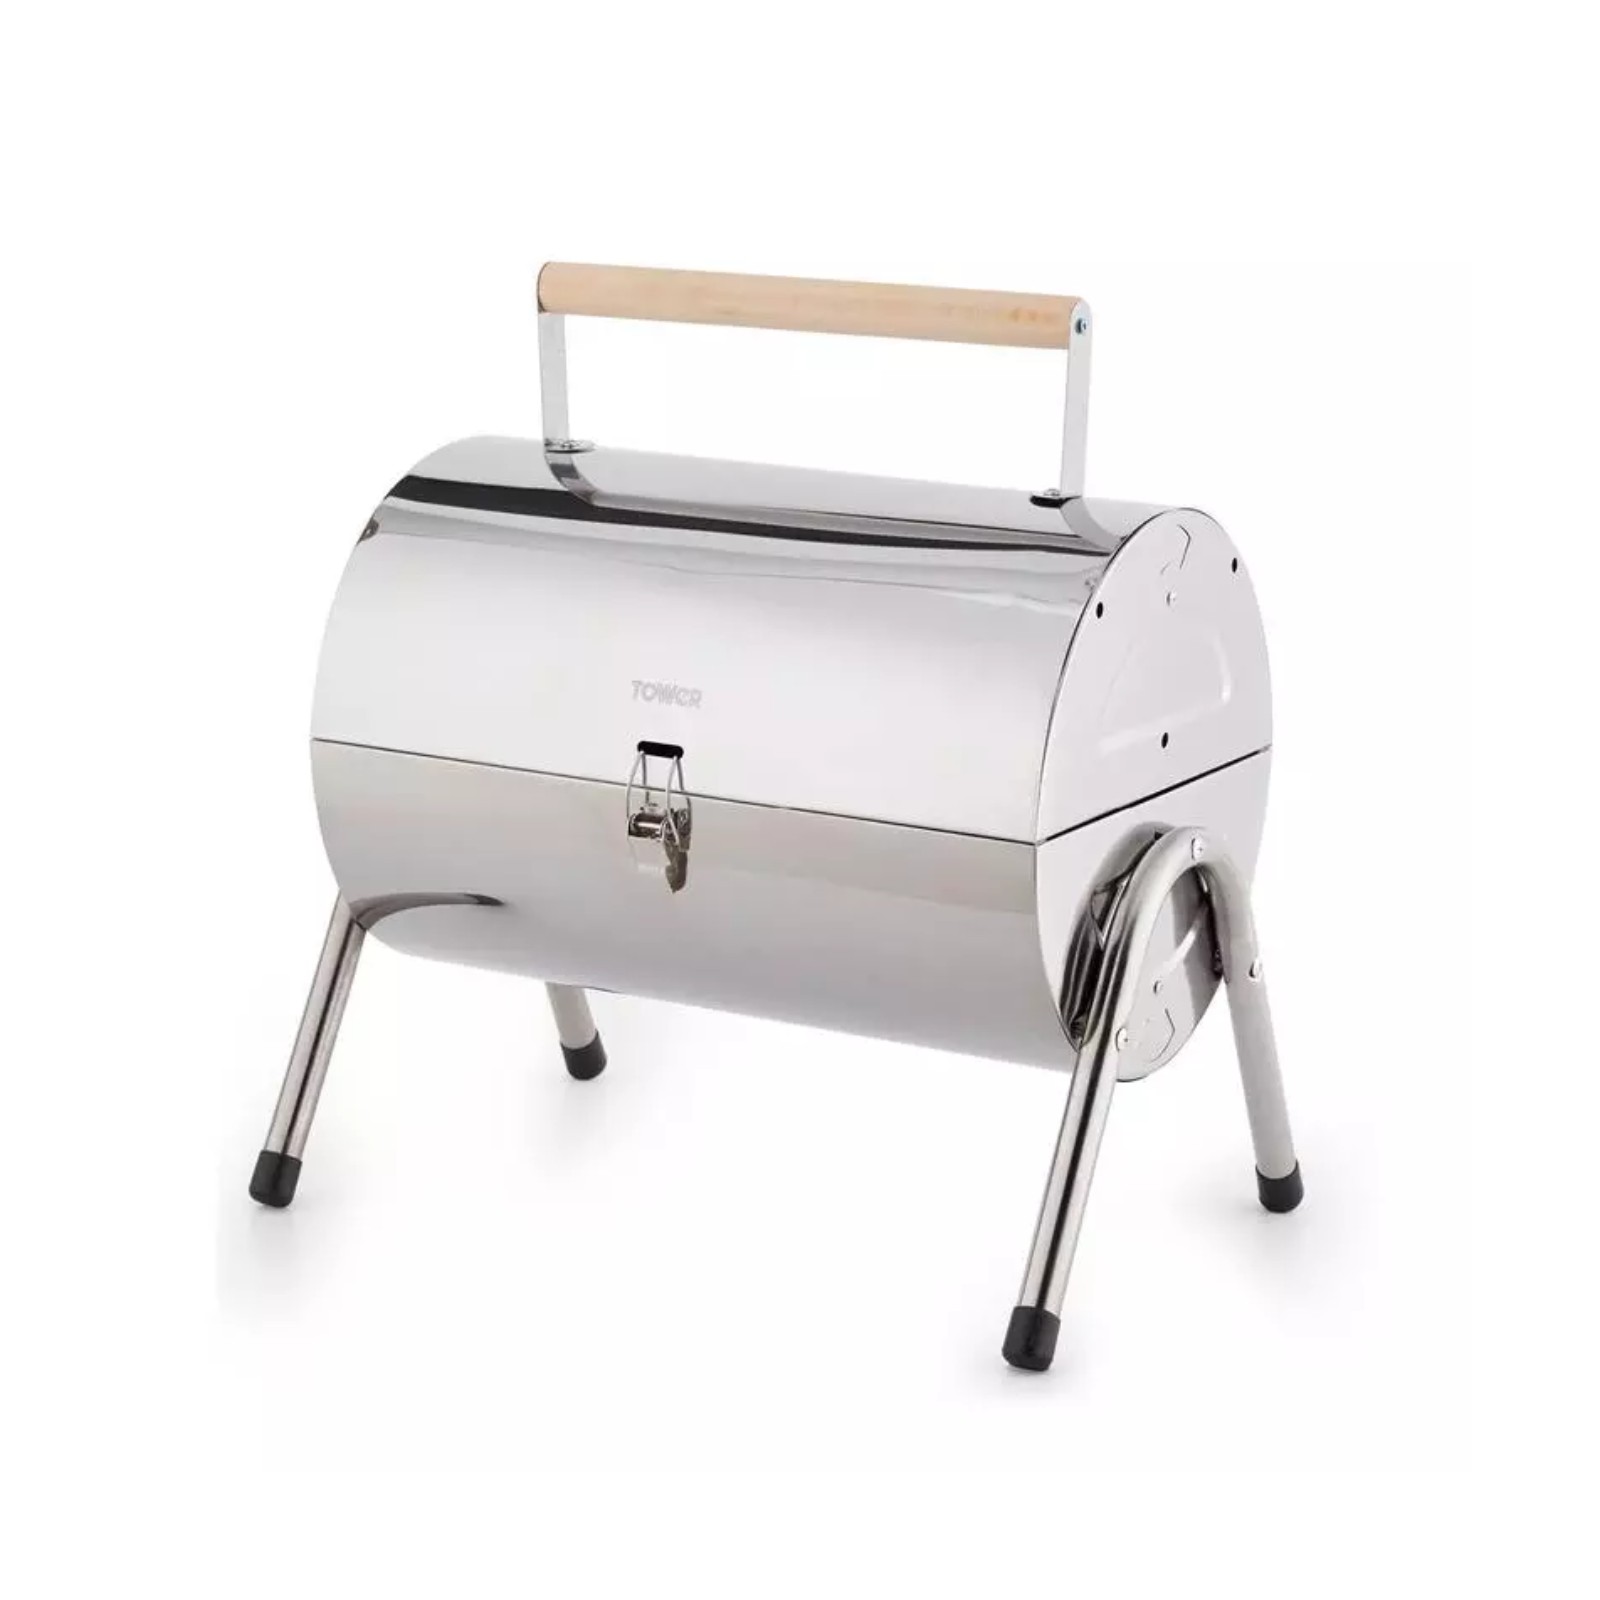 Tower Stainless steel Barbeque